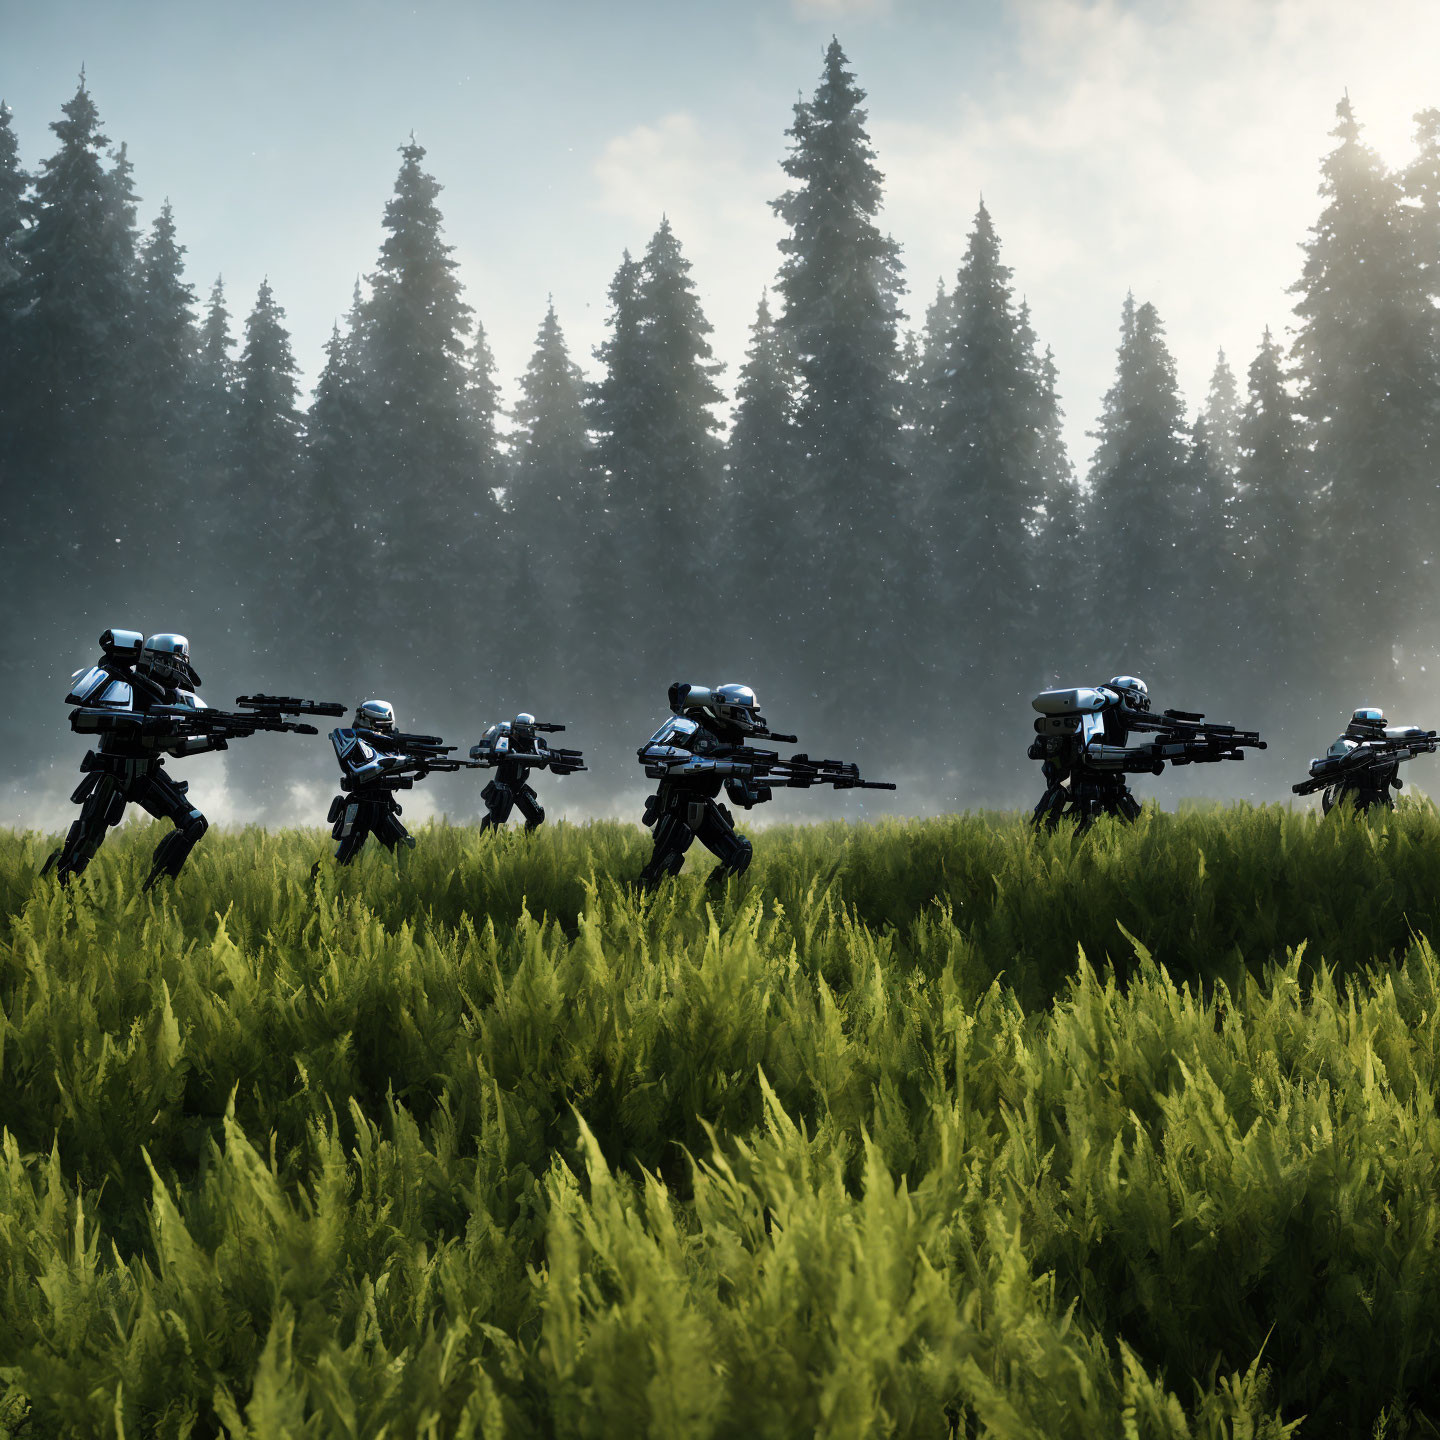 Futuristic soldiers in blue armor in misty forest clearing